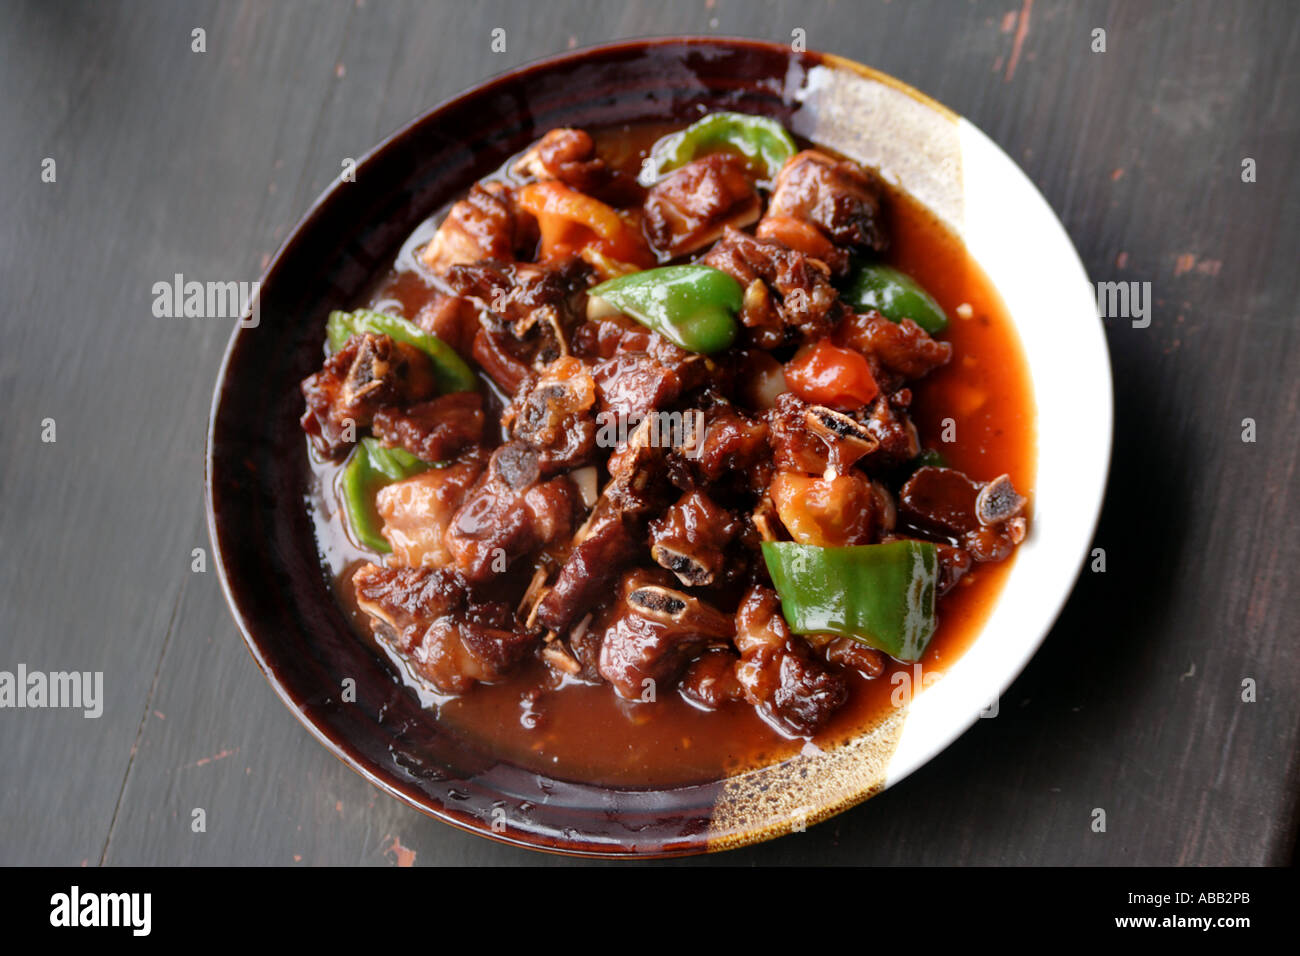 Steaming Hot Entree of Sweet and Sour Pork, Chinese Food, Liugong Village, China Stock Photo